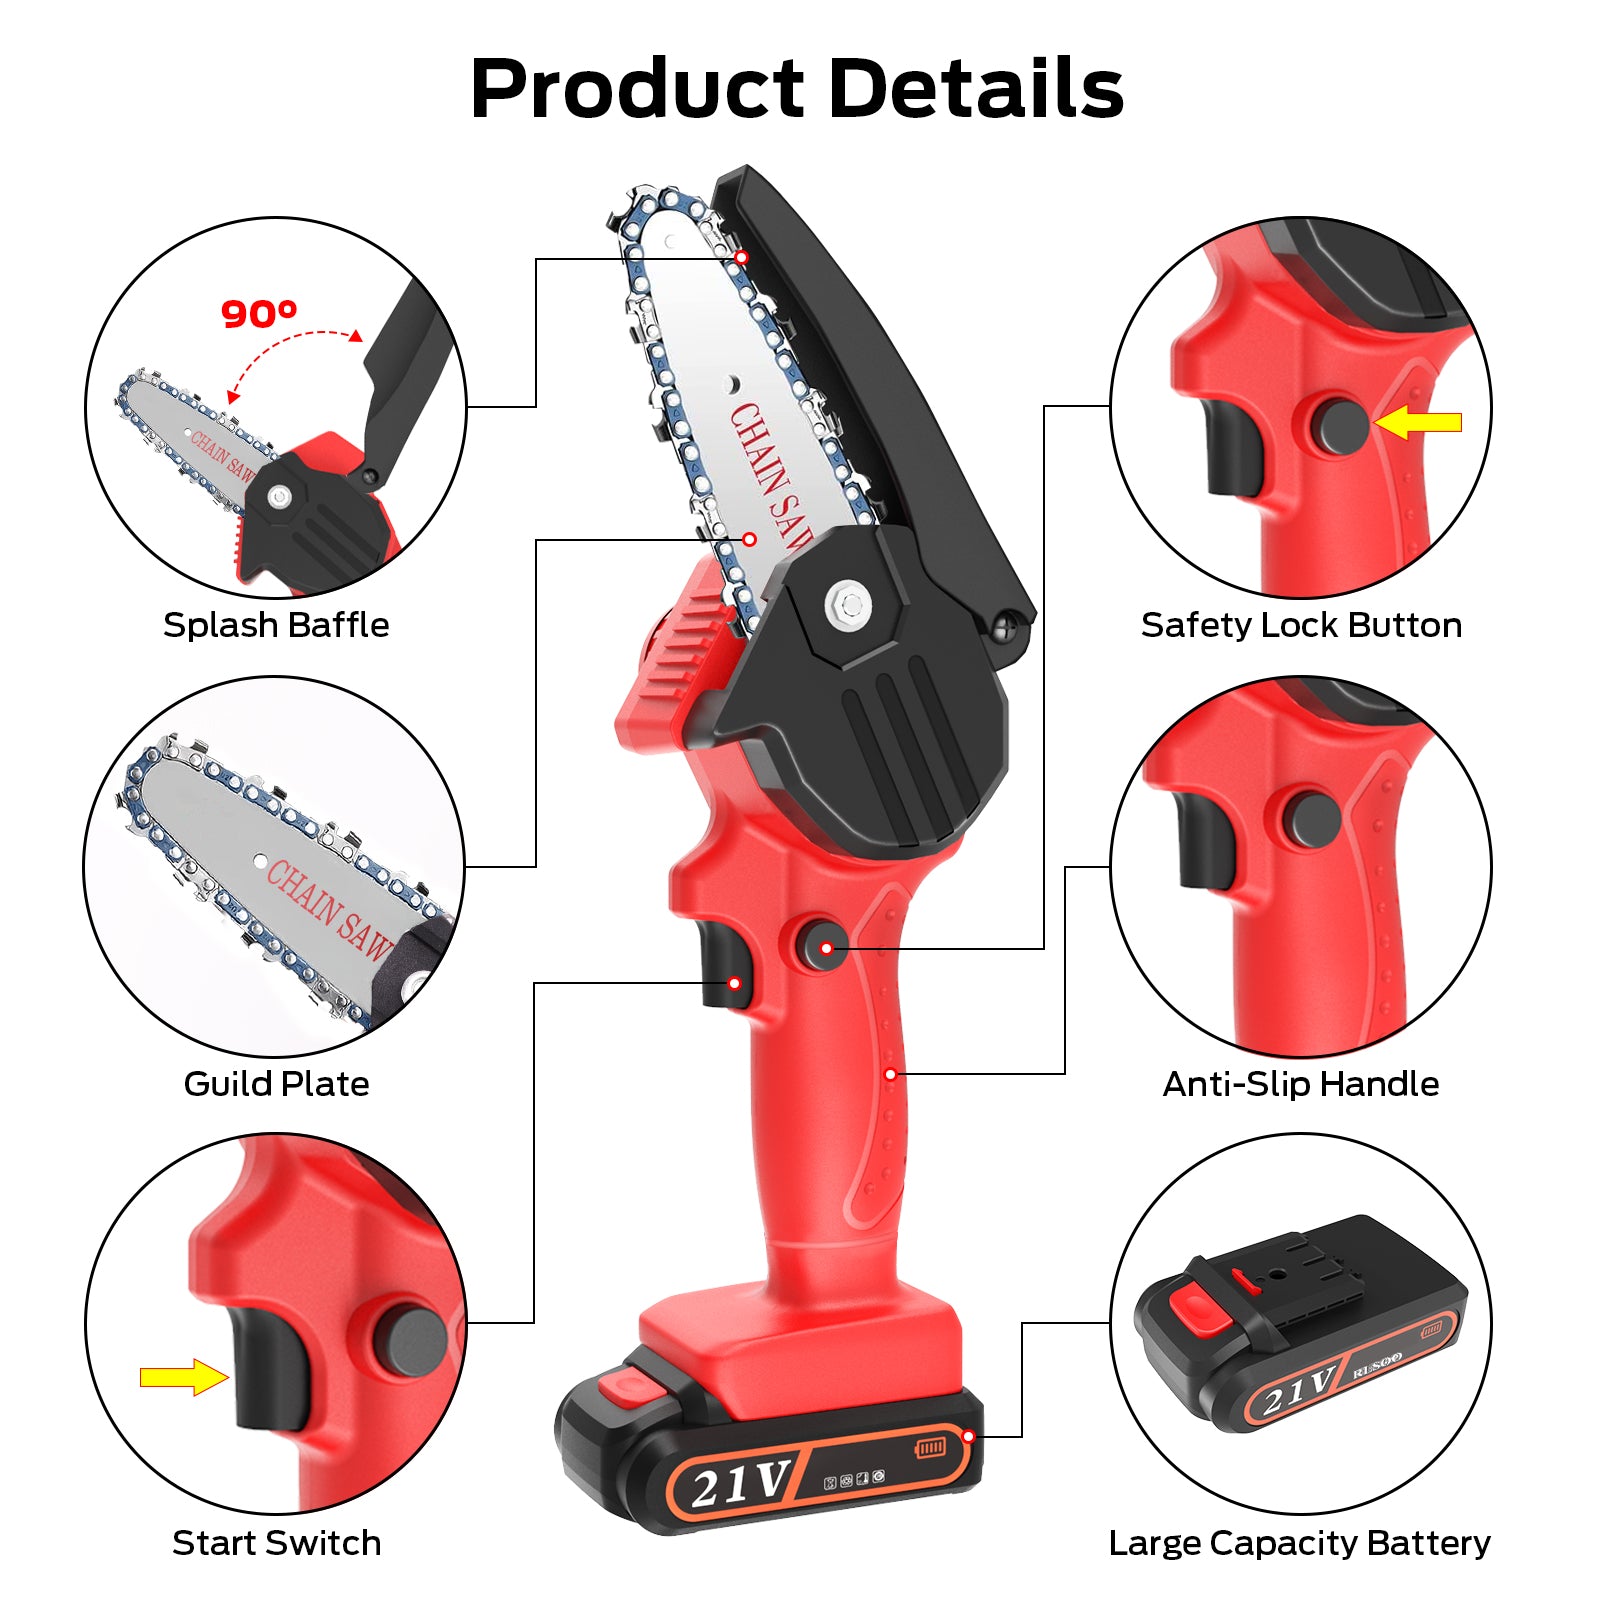 Mini Chainsaw Cordless with 2 Batteries 2 Chains, 2023 Upgrade 6 inch Best Mini Chain Saw Cordless with Security Lock, Handheld Small Chainsaw for